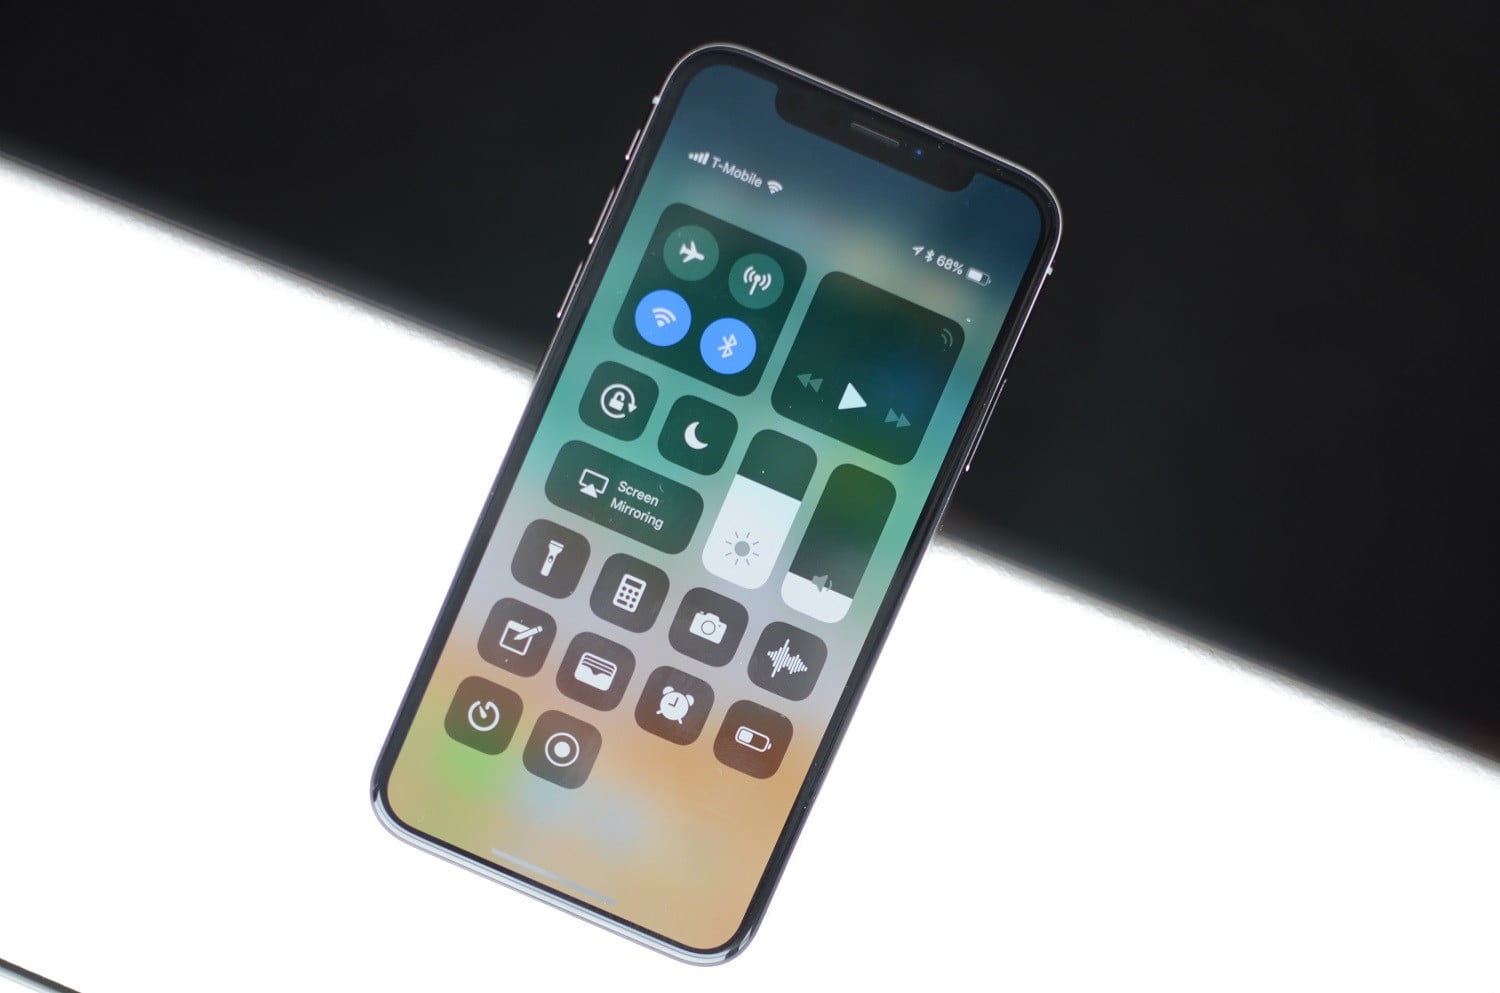 Exciting Features of iOS 12 You Should Check